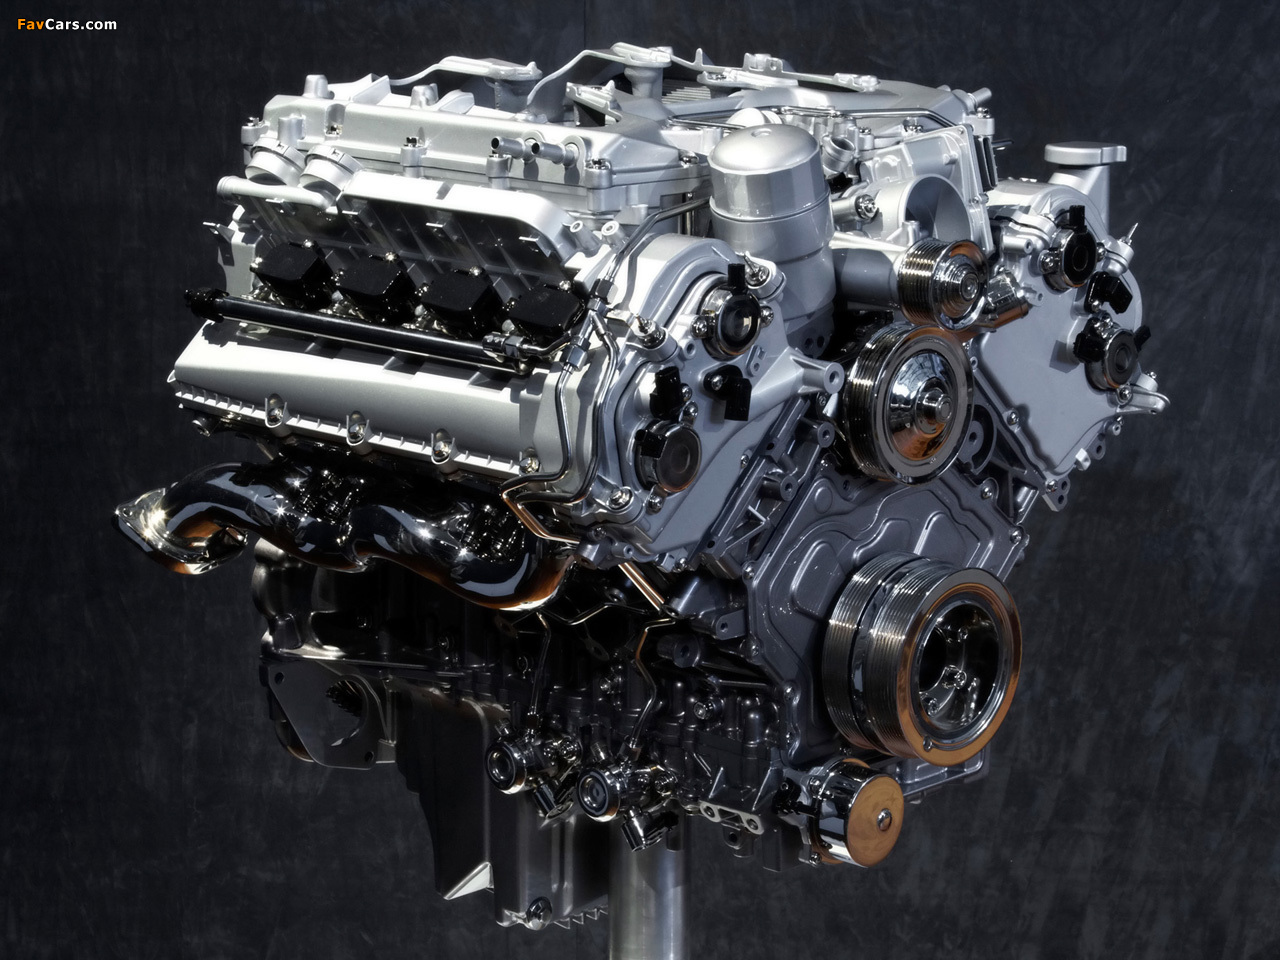 Images of Engines  Land Rover V8 4.2 (1280 x 960)